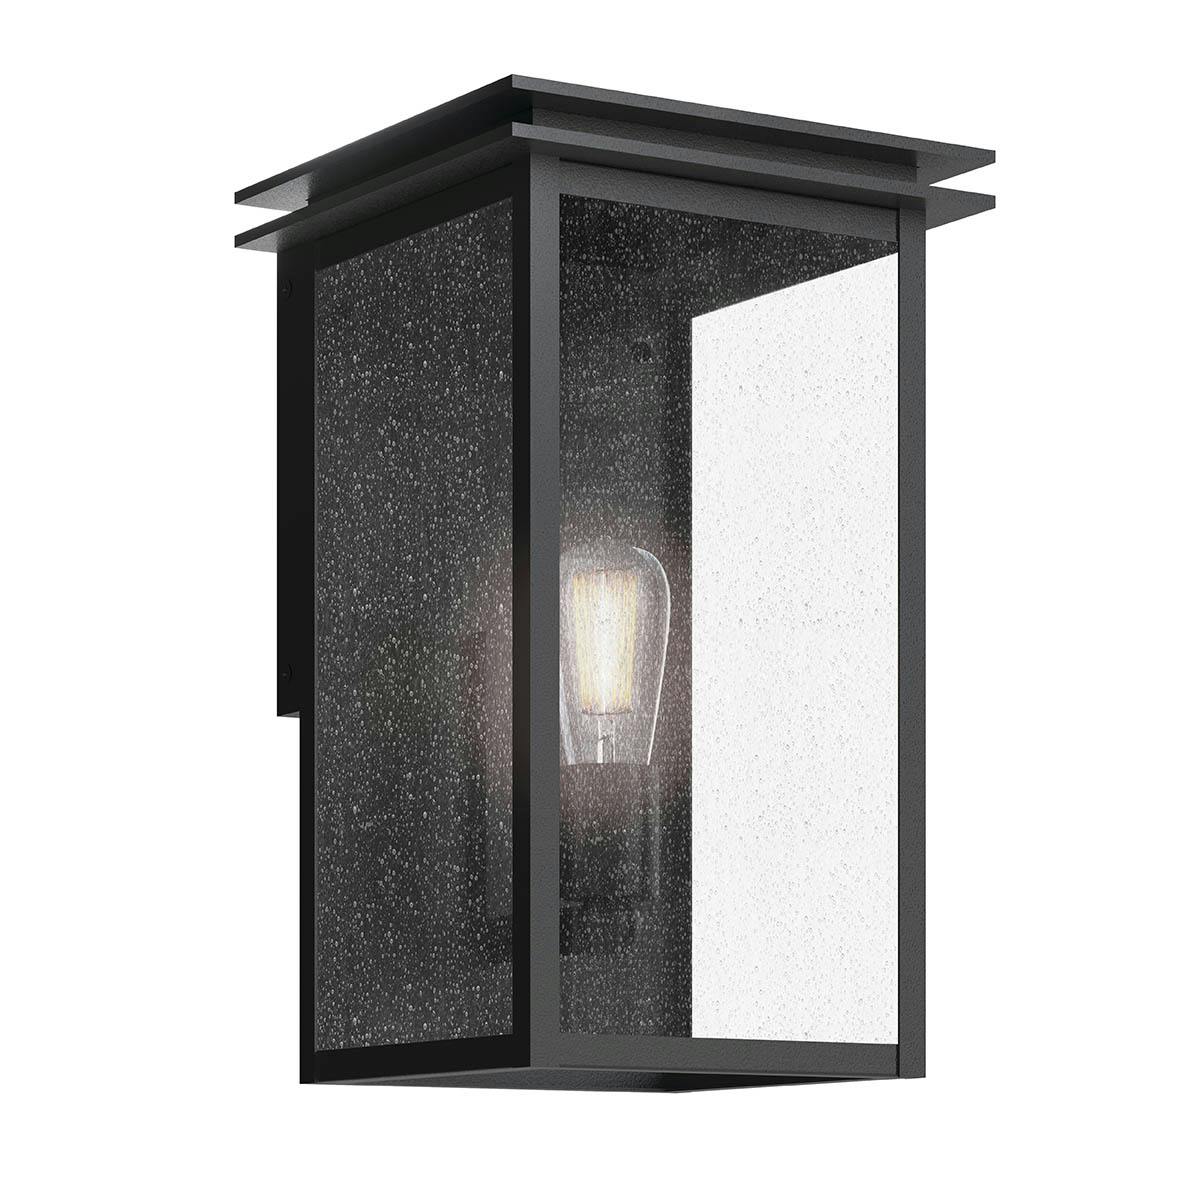 The Arkville 14" 1 Light Outdoor Wall Light Textured Black on a white background